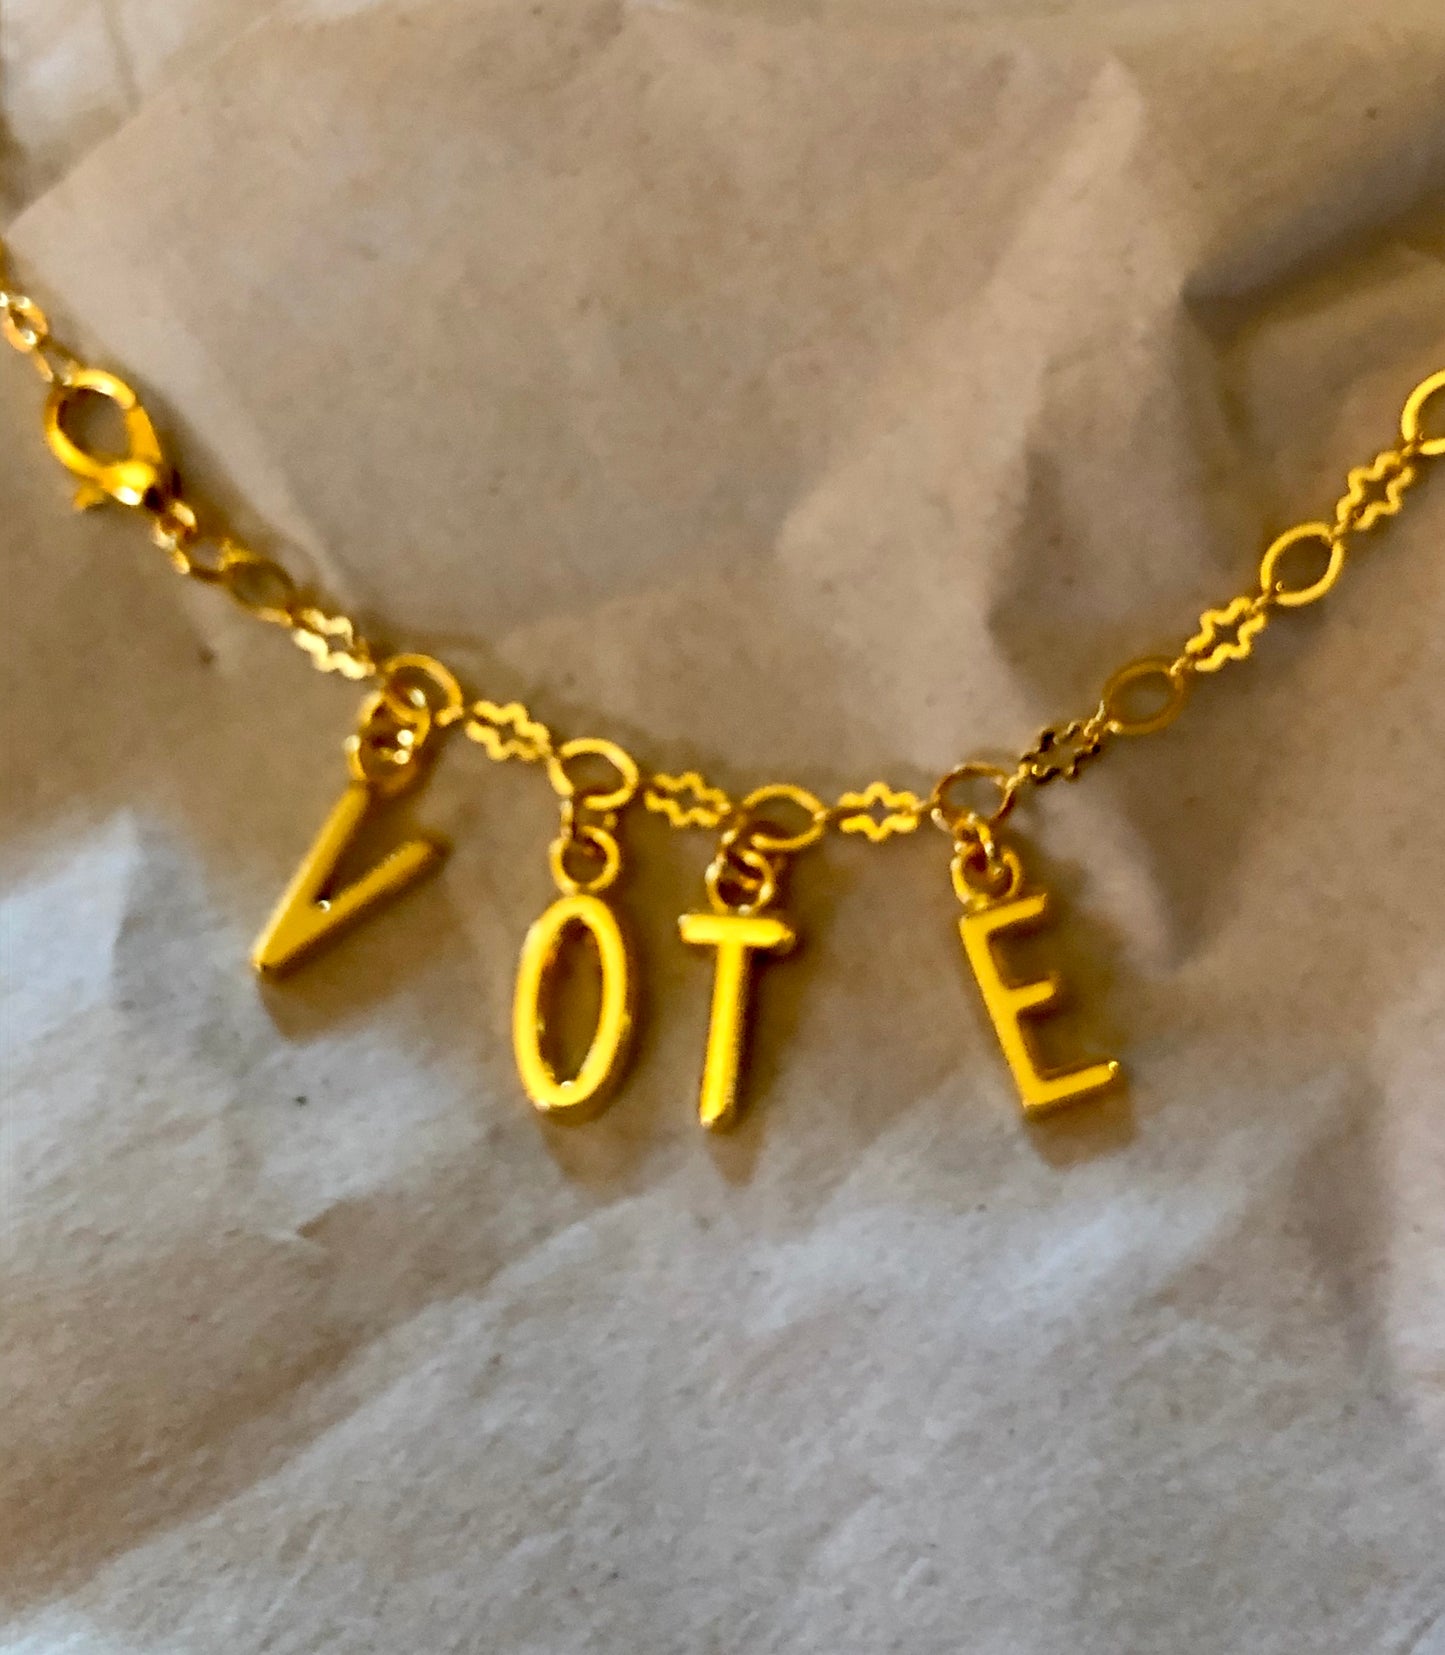 Knight&Hammer VOTE necklace Limited Edition